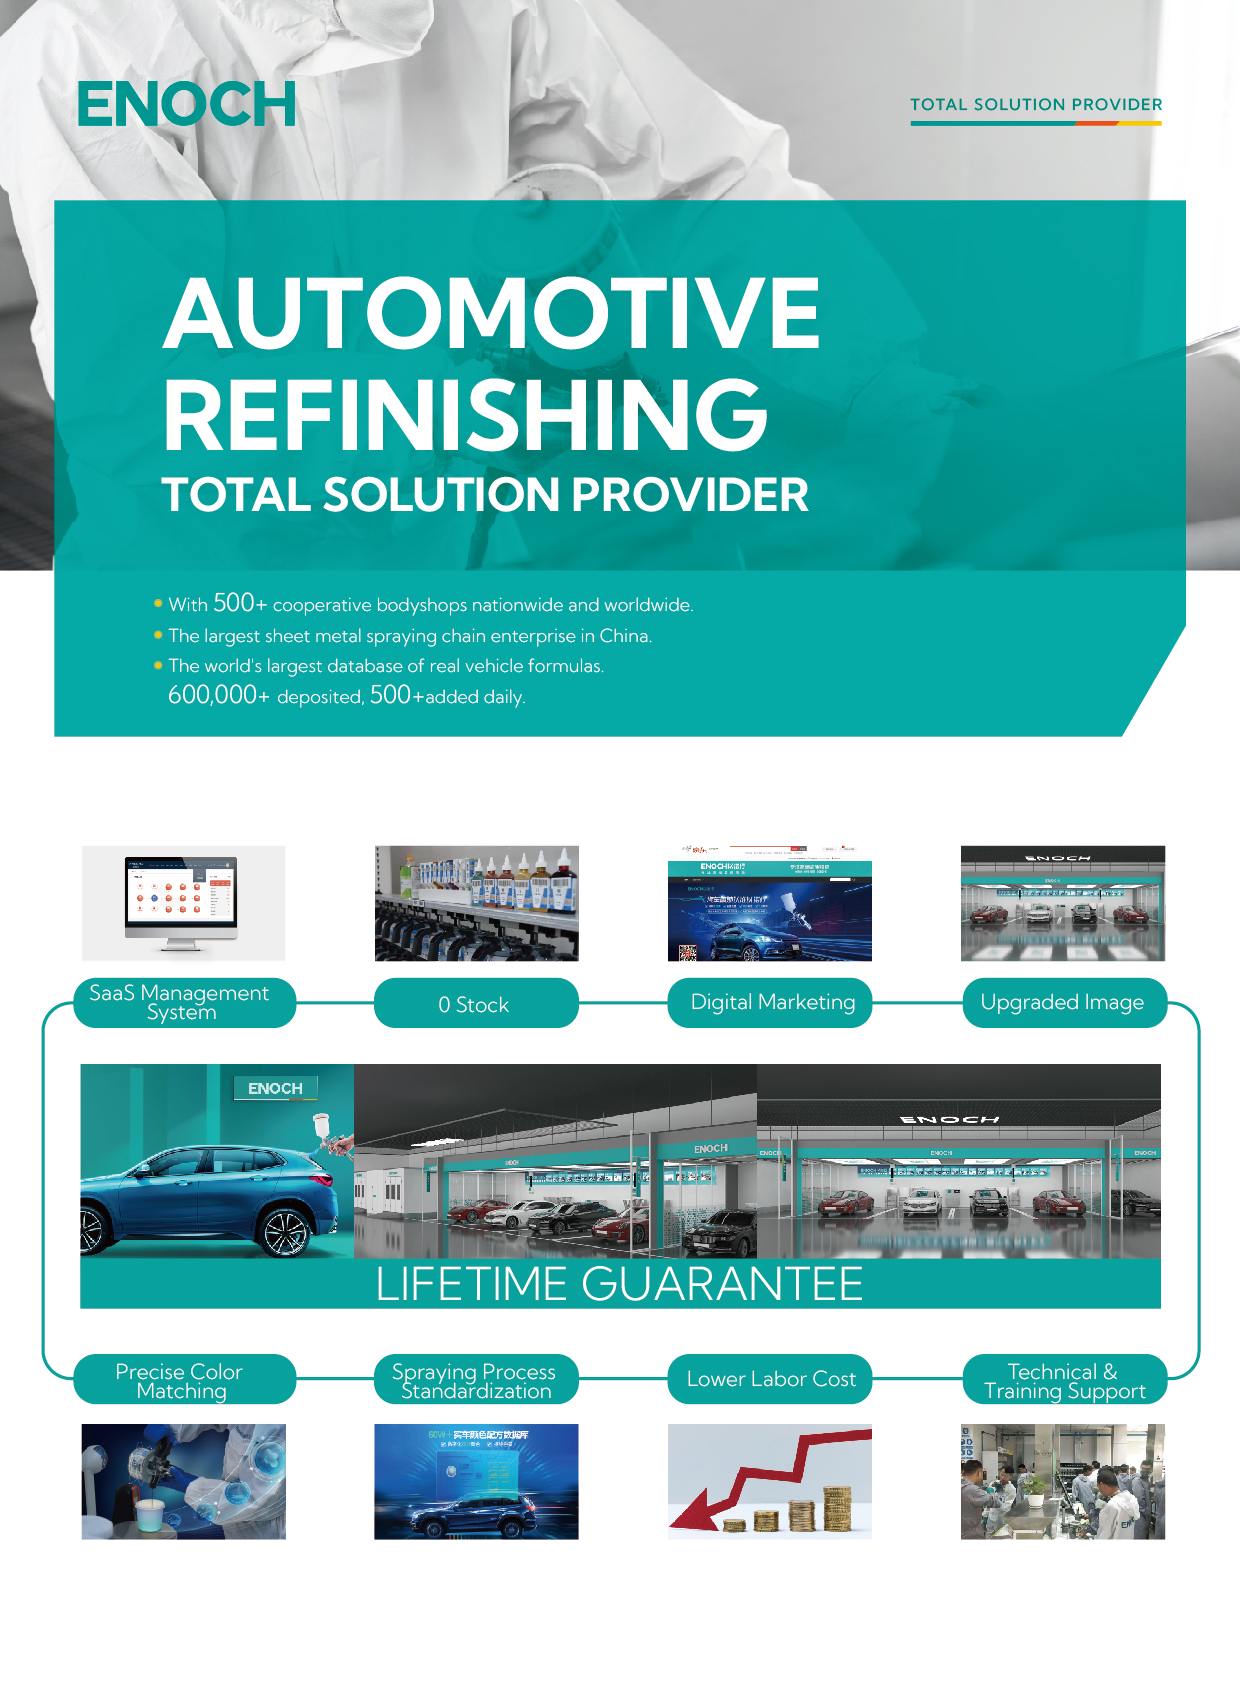 Efficient Automotive Refinishing Total Solution System with High Durability and Accurate Color Matching